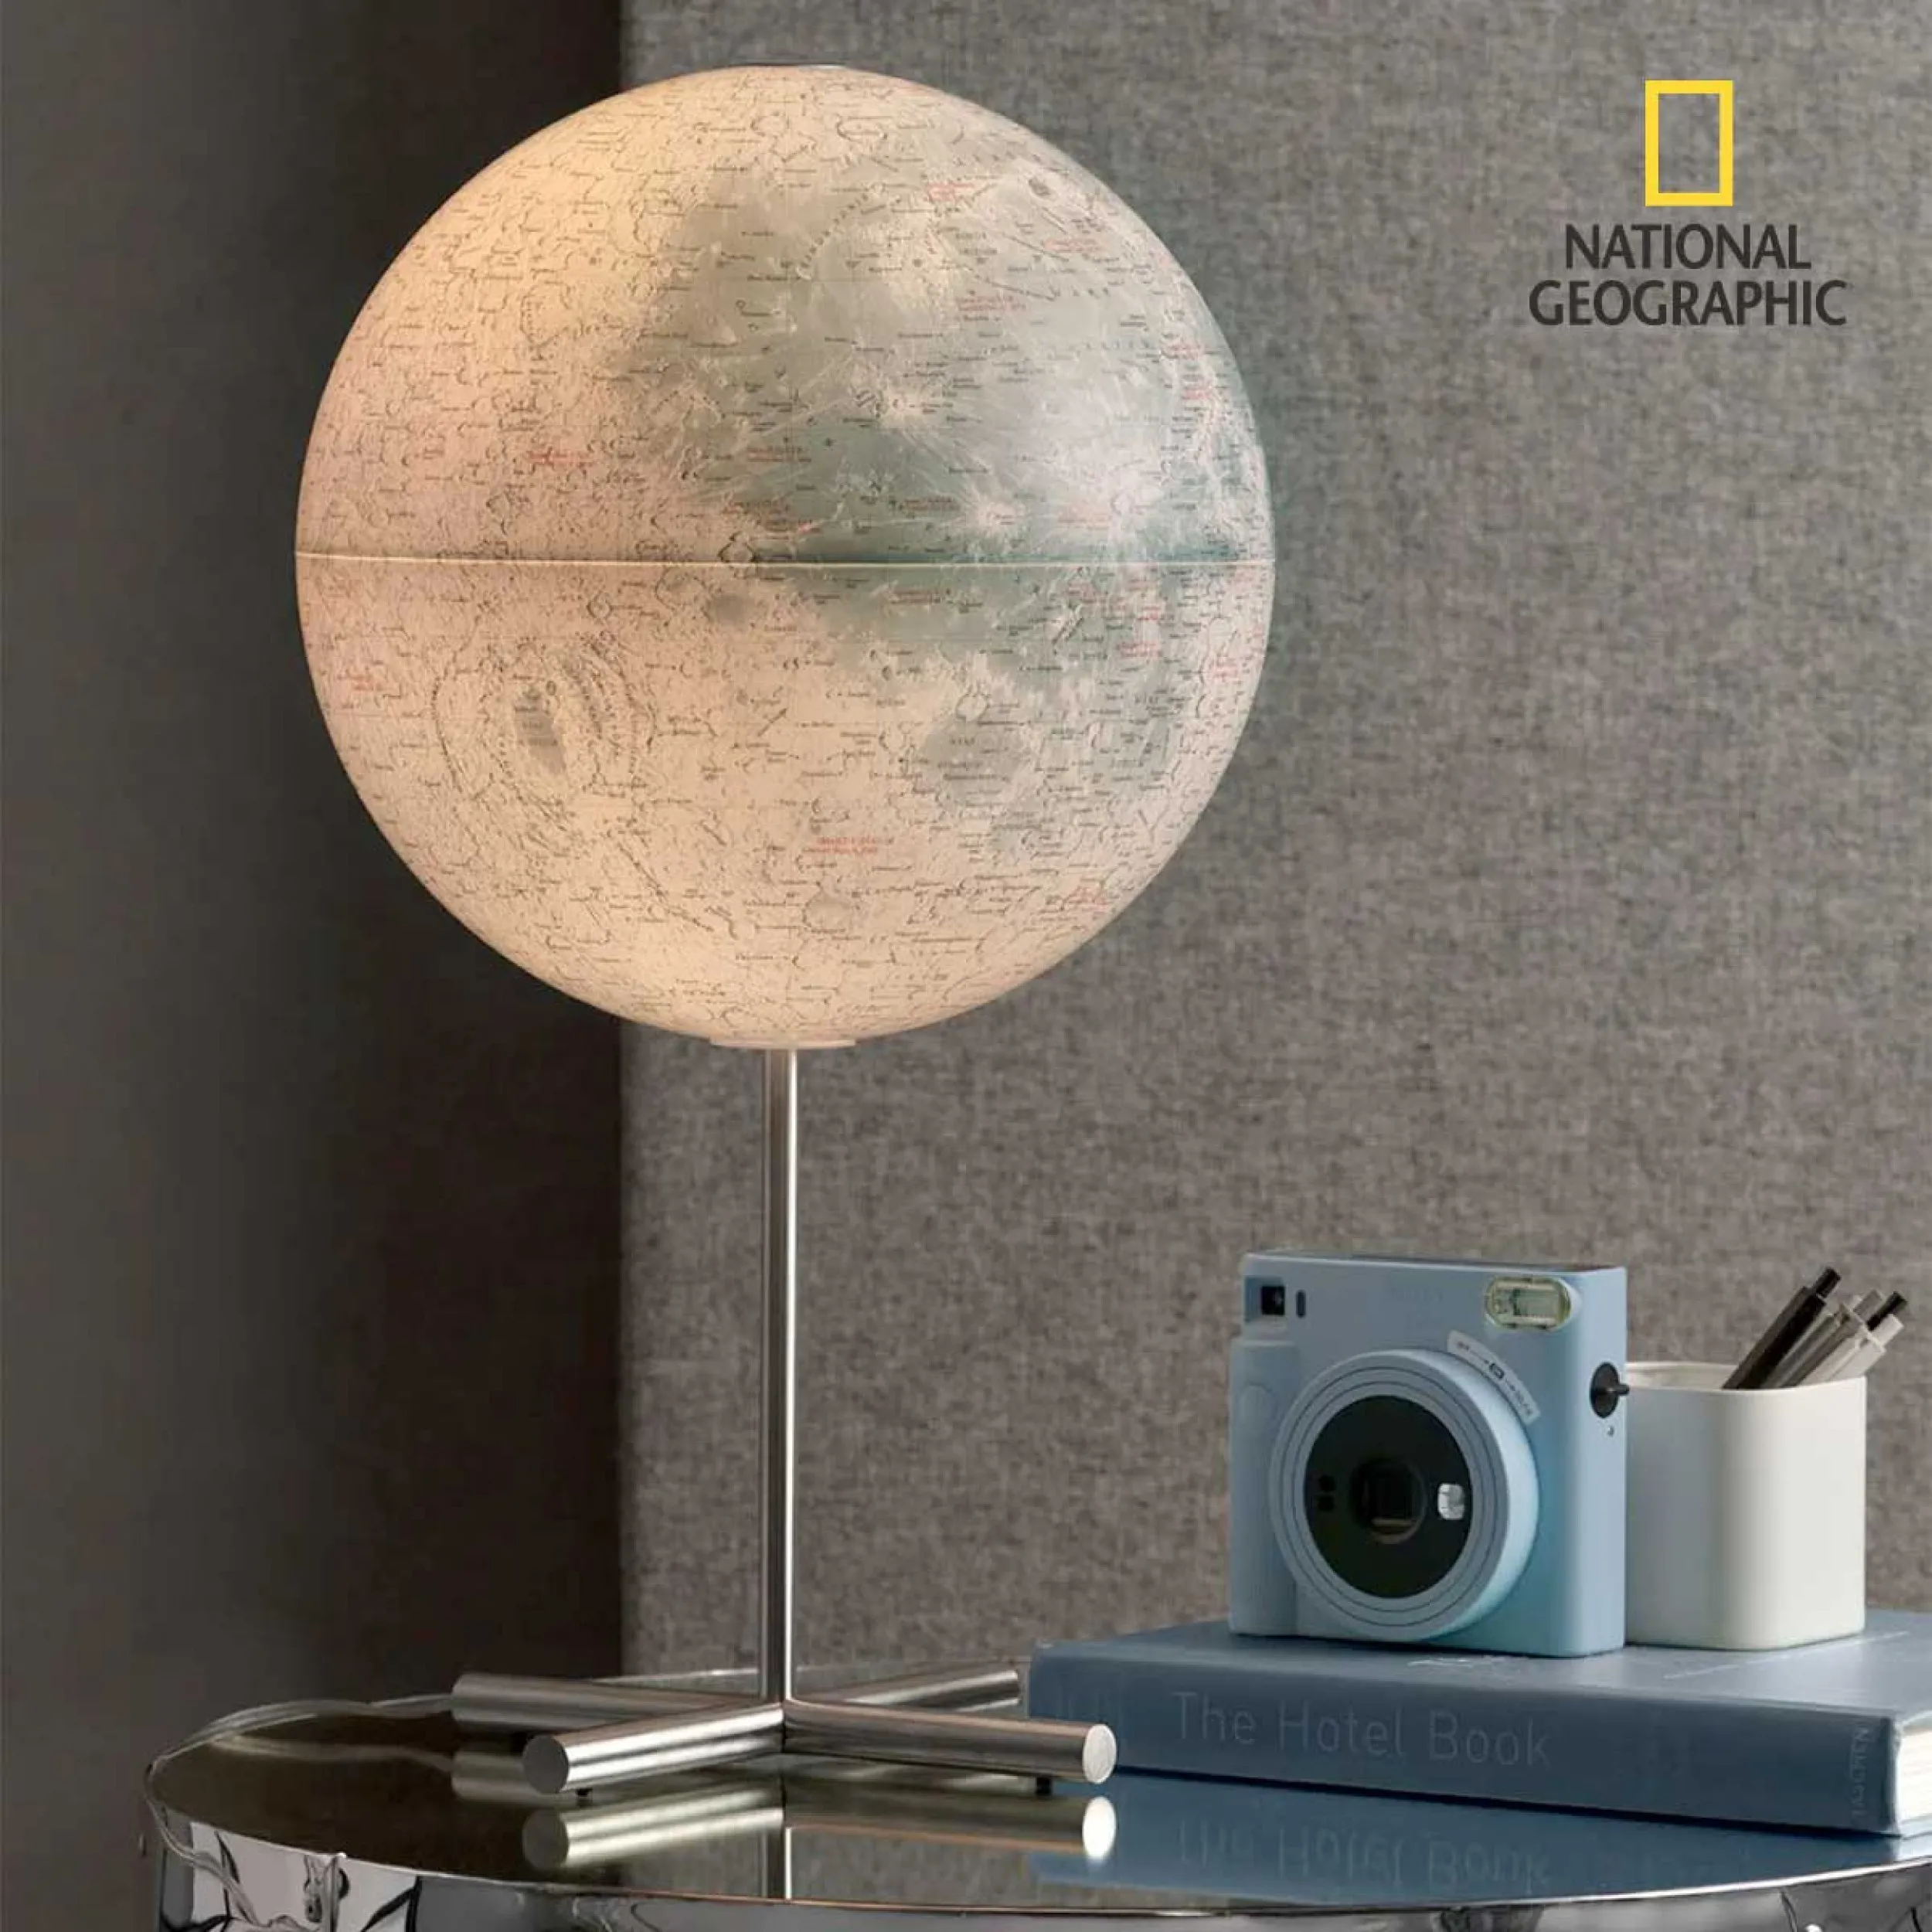 Special edition - Moon globe - National Geographic - Ø 30 cm